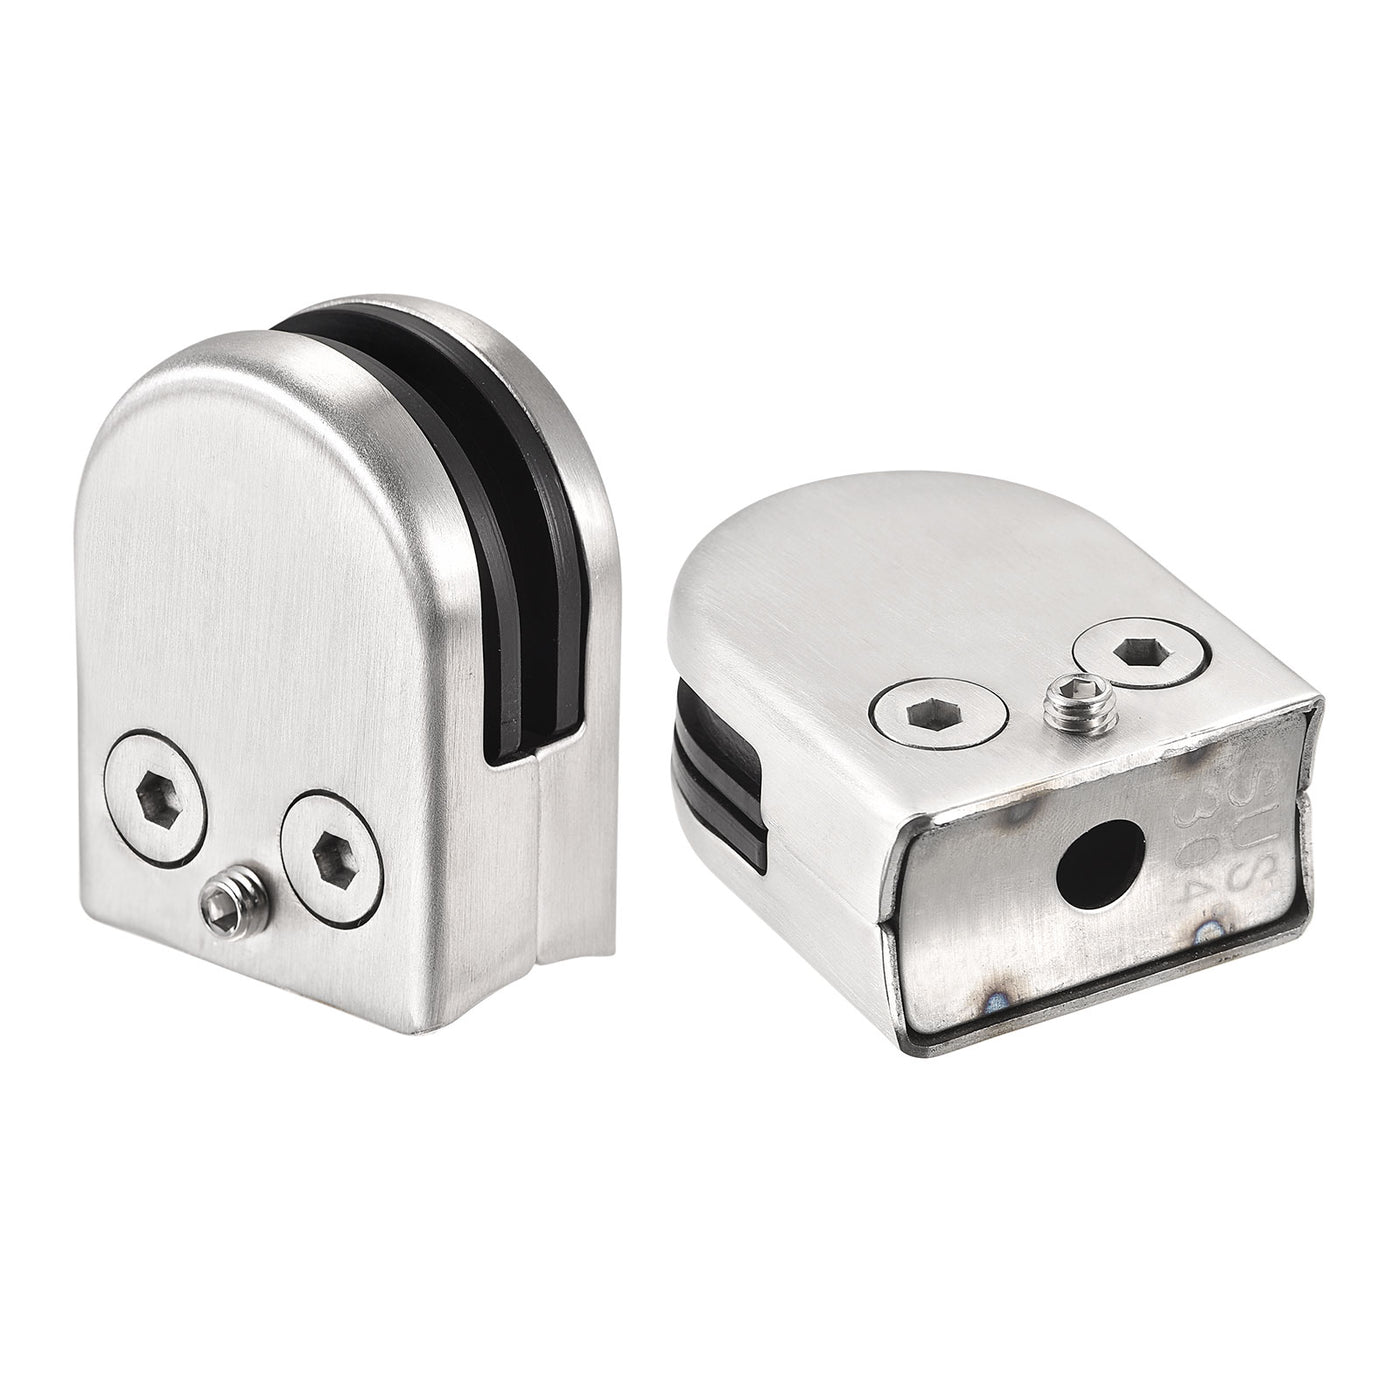 Uxcell Uxcell Glass Clamp 2pcs for 10-12mm Thick 65x43mm 304 Stainless Steel Glass Clip